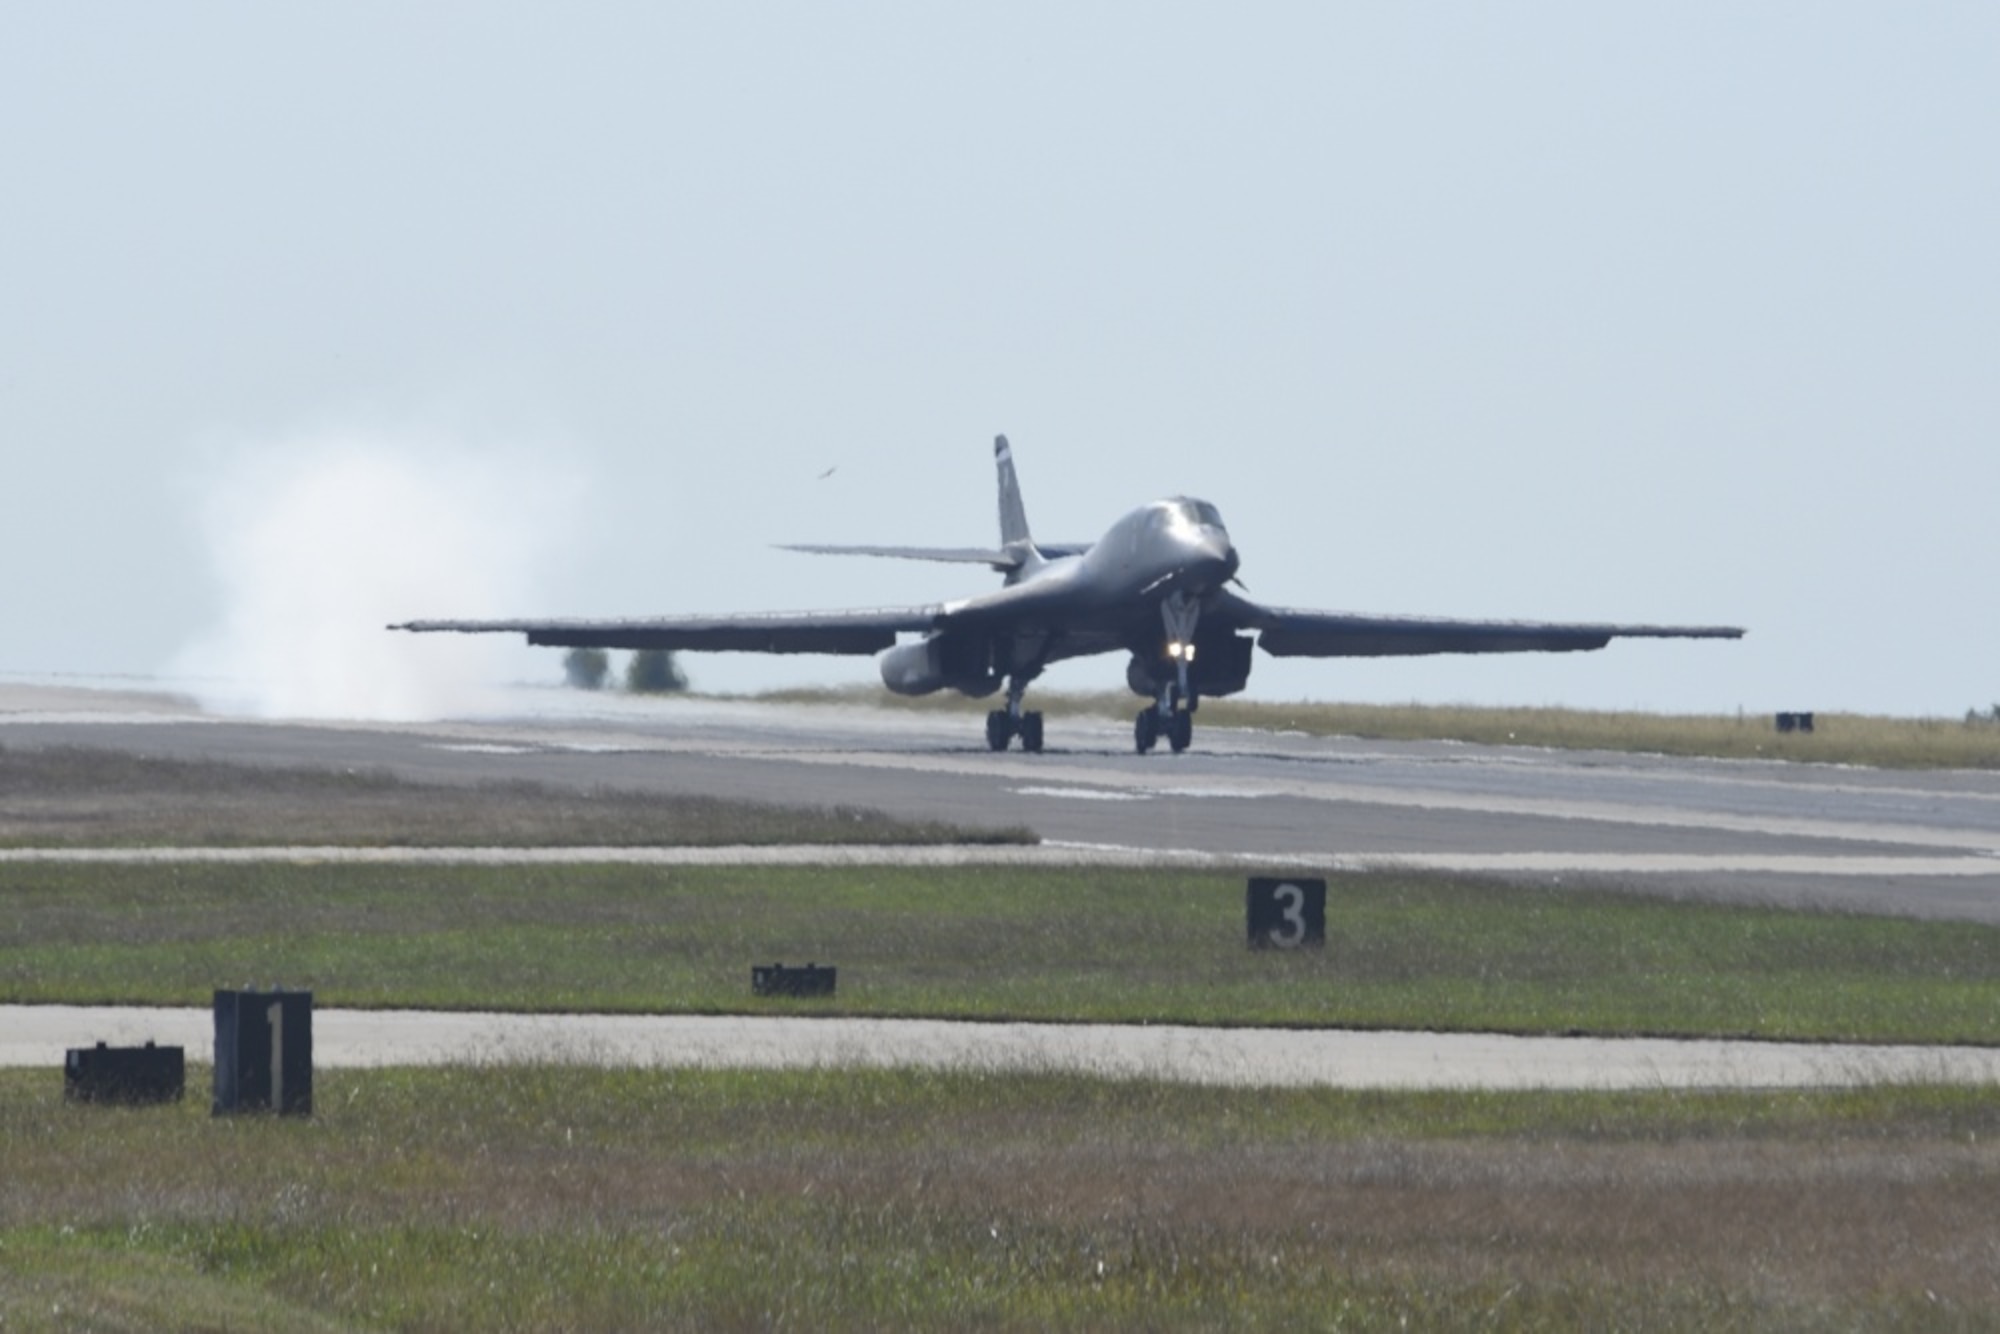 Seen through heat-haze is B-1B Lancer, 86-0109, as it arrives at Tinker Air Force Base, Oklahoma, Oct. 26, 2018 where it will undergo depot-level maintenance and upgrades with the Oklahoma City Air Logistics Complex. During a routine training flight May 1, the Dyess AFB based B-1B had an in-flight emergency resulting in an attempted ejection. The first crewmembers’ seat failed to deploy and the aircraft commander halted the ejection sequence and heroically saved the aircraft and crew by landing at Midland International Air and Space Port.